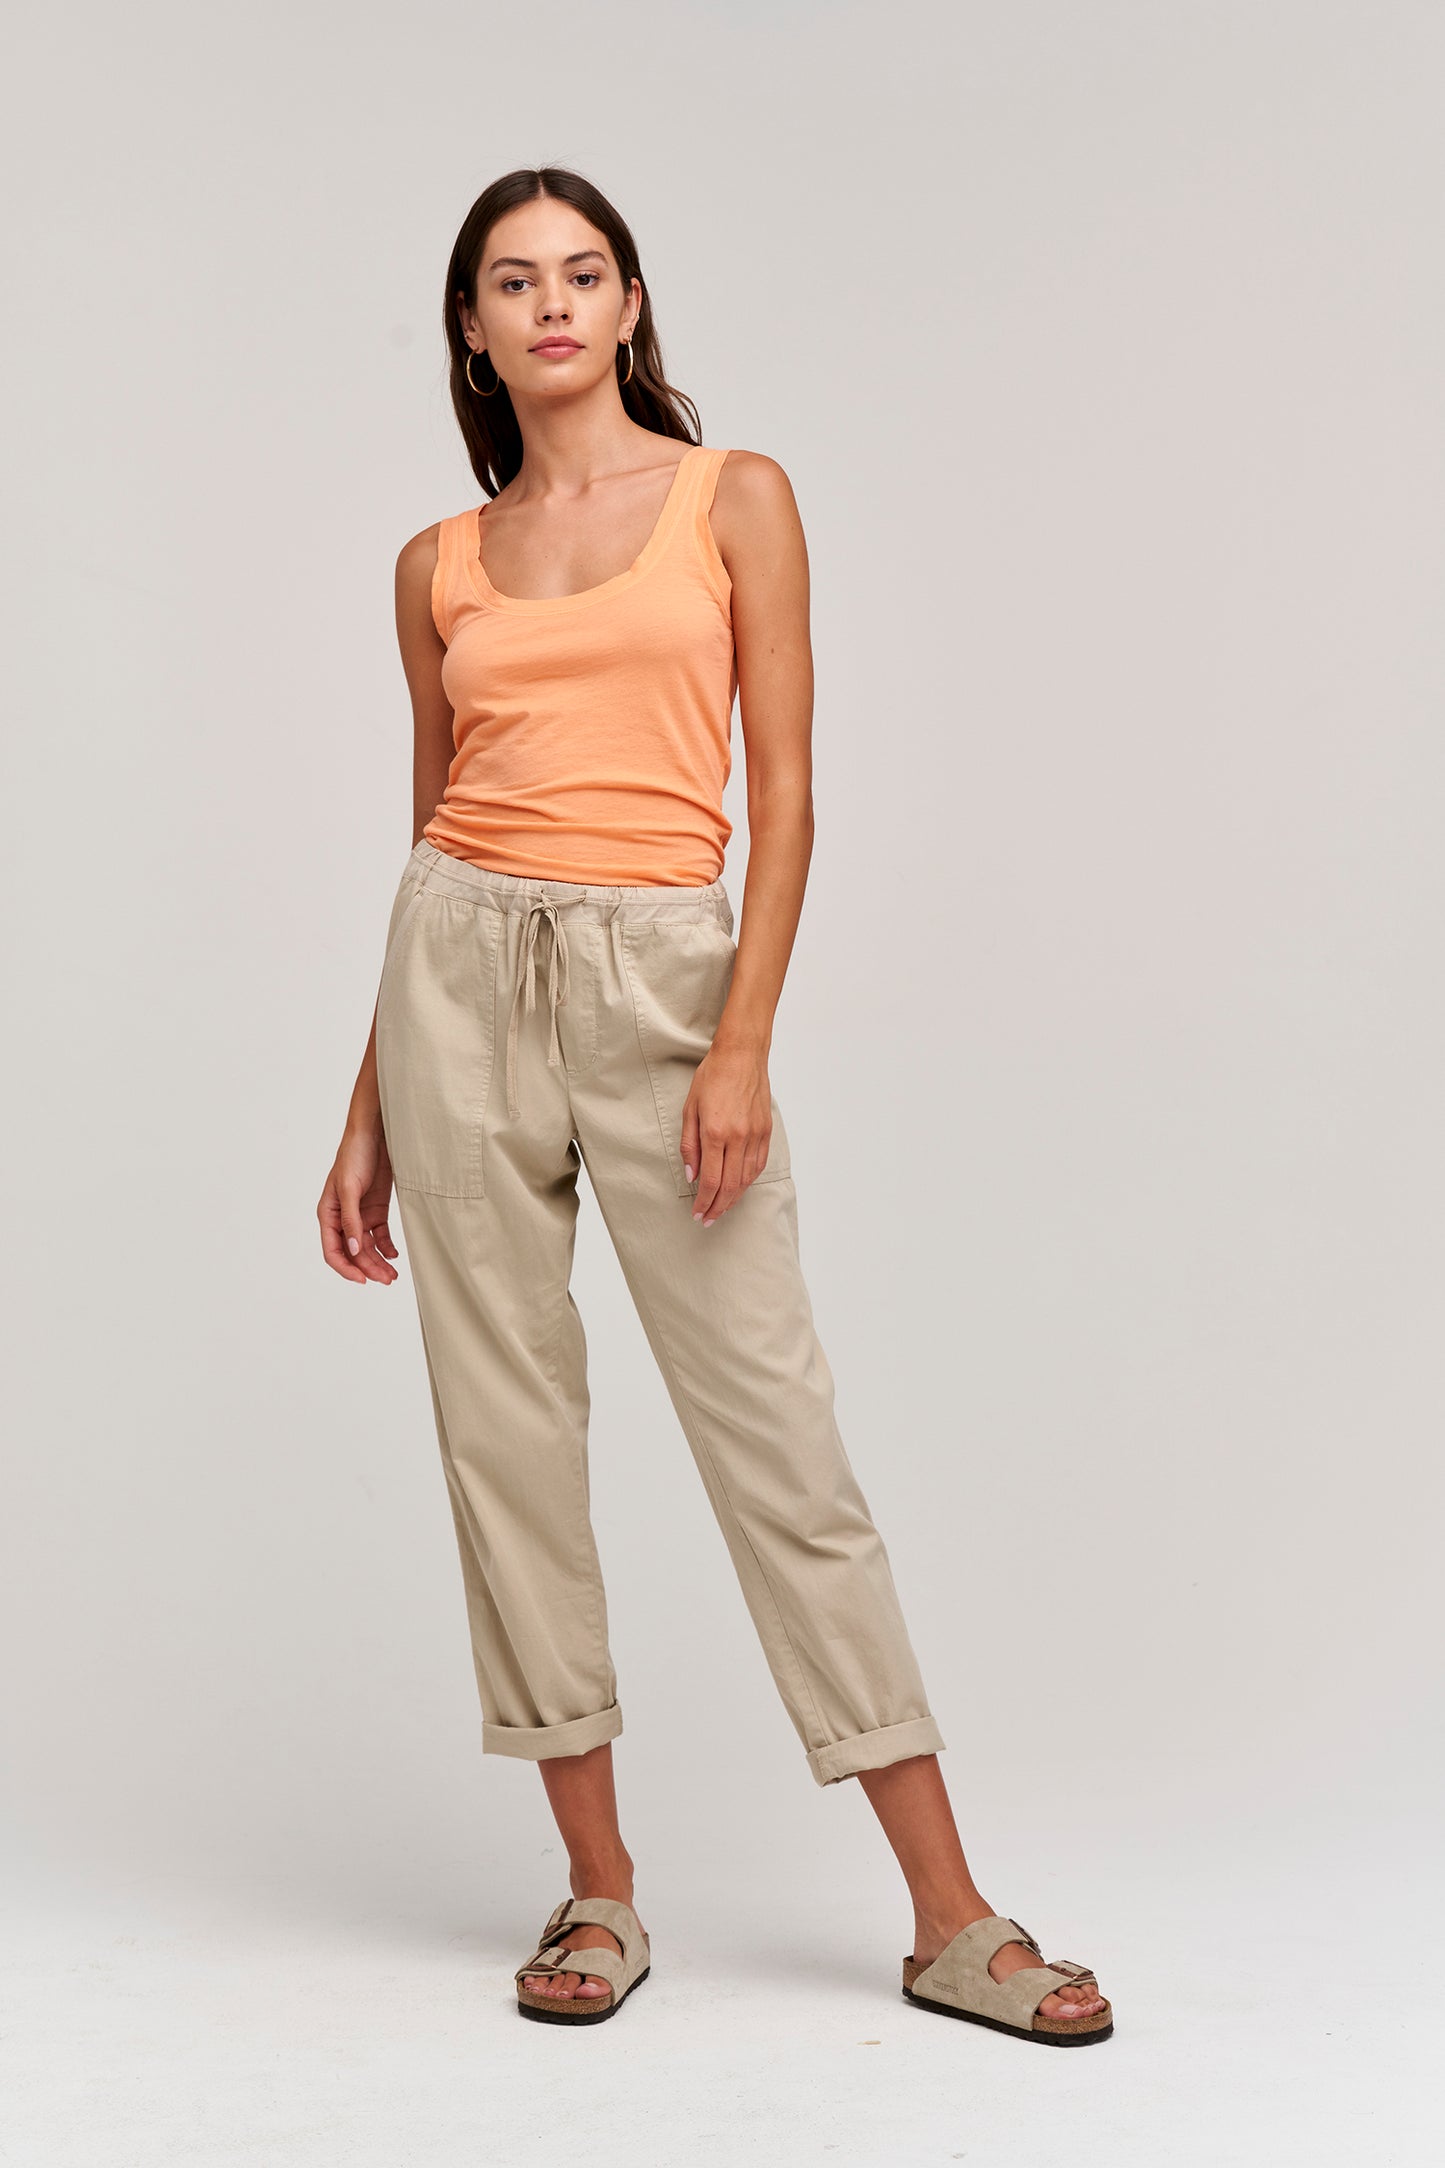 MISTY PANT COTTWILL IN OATMEAL